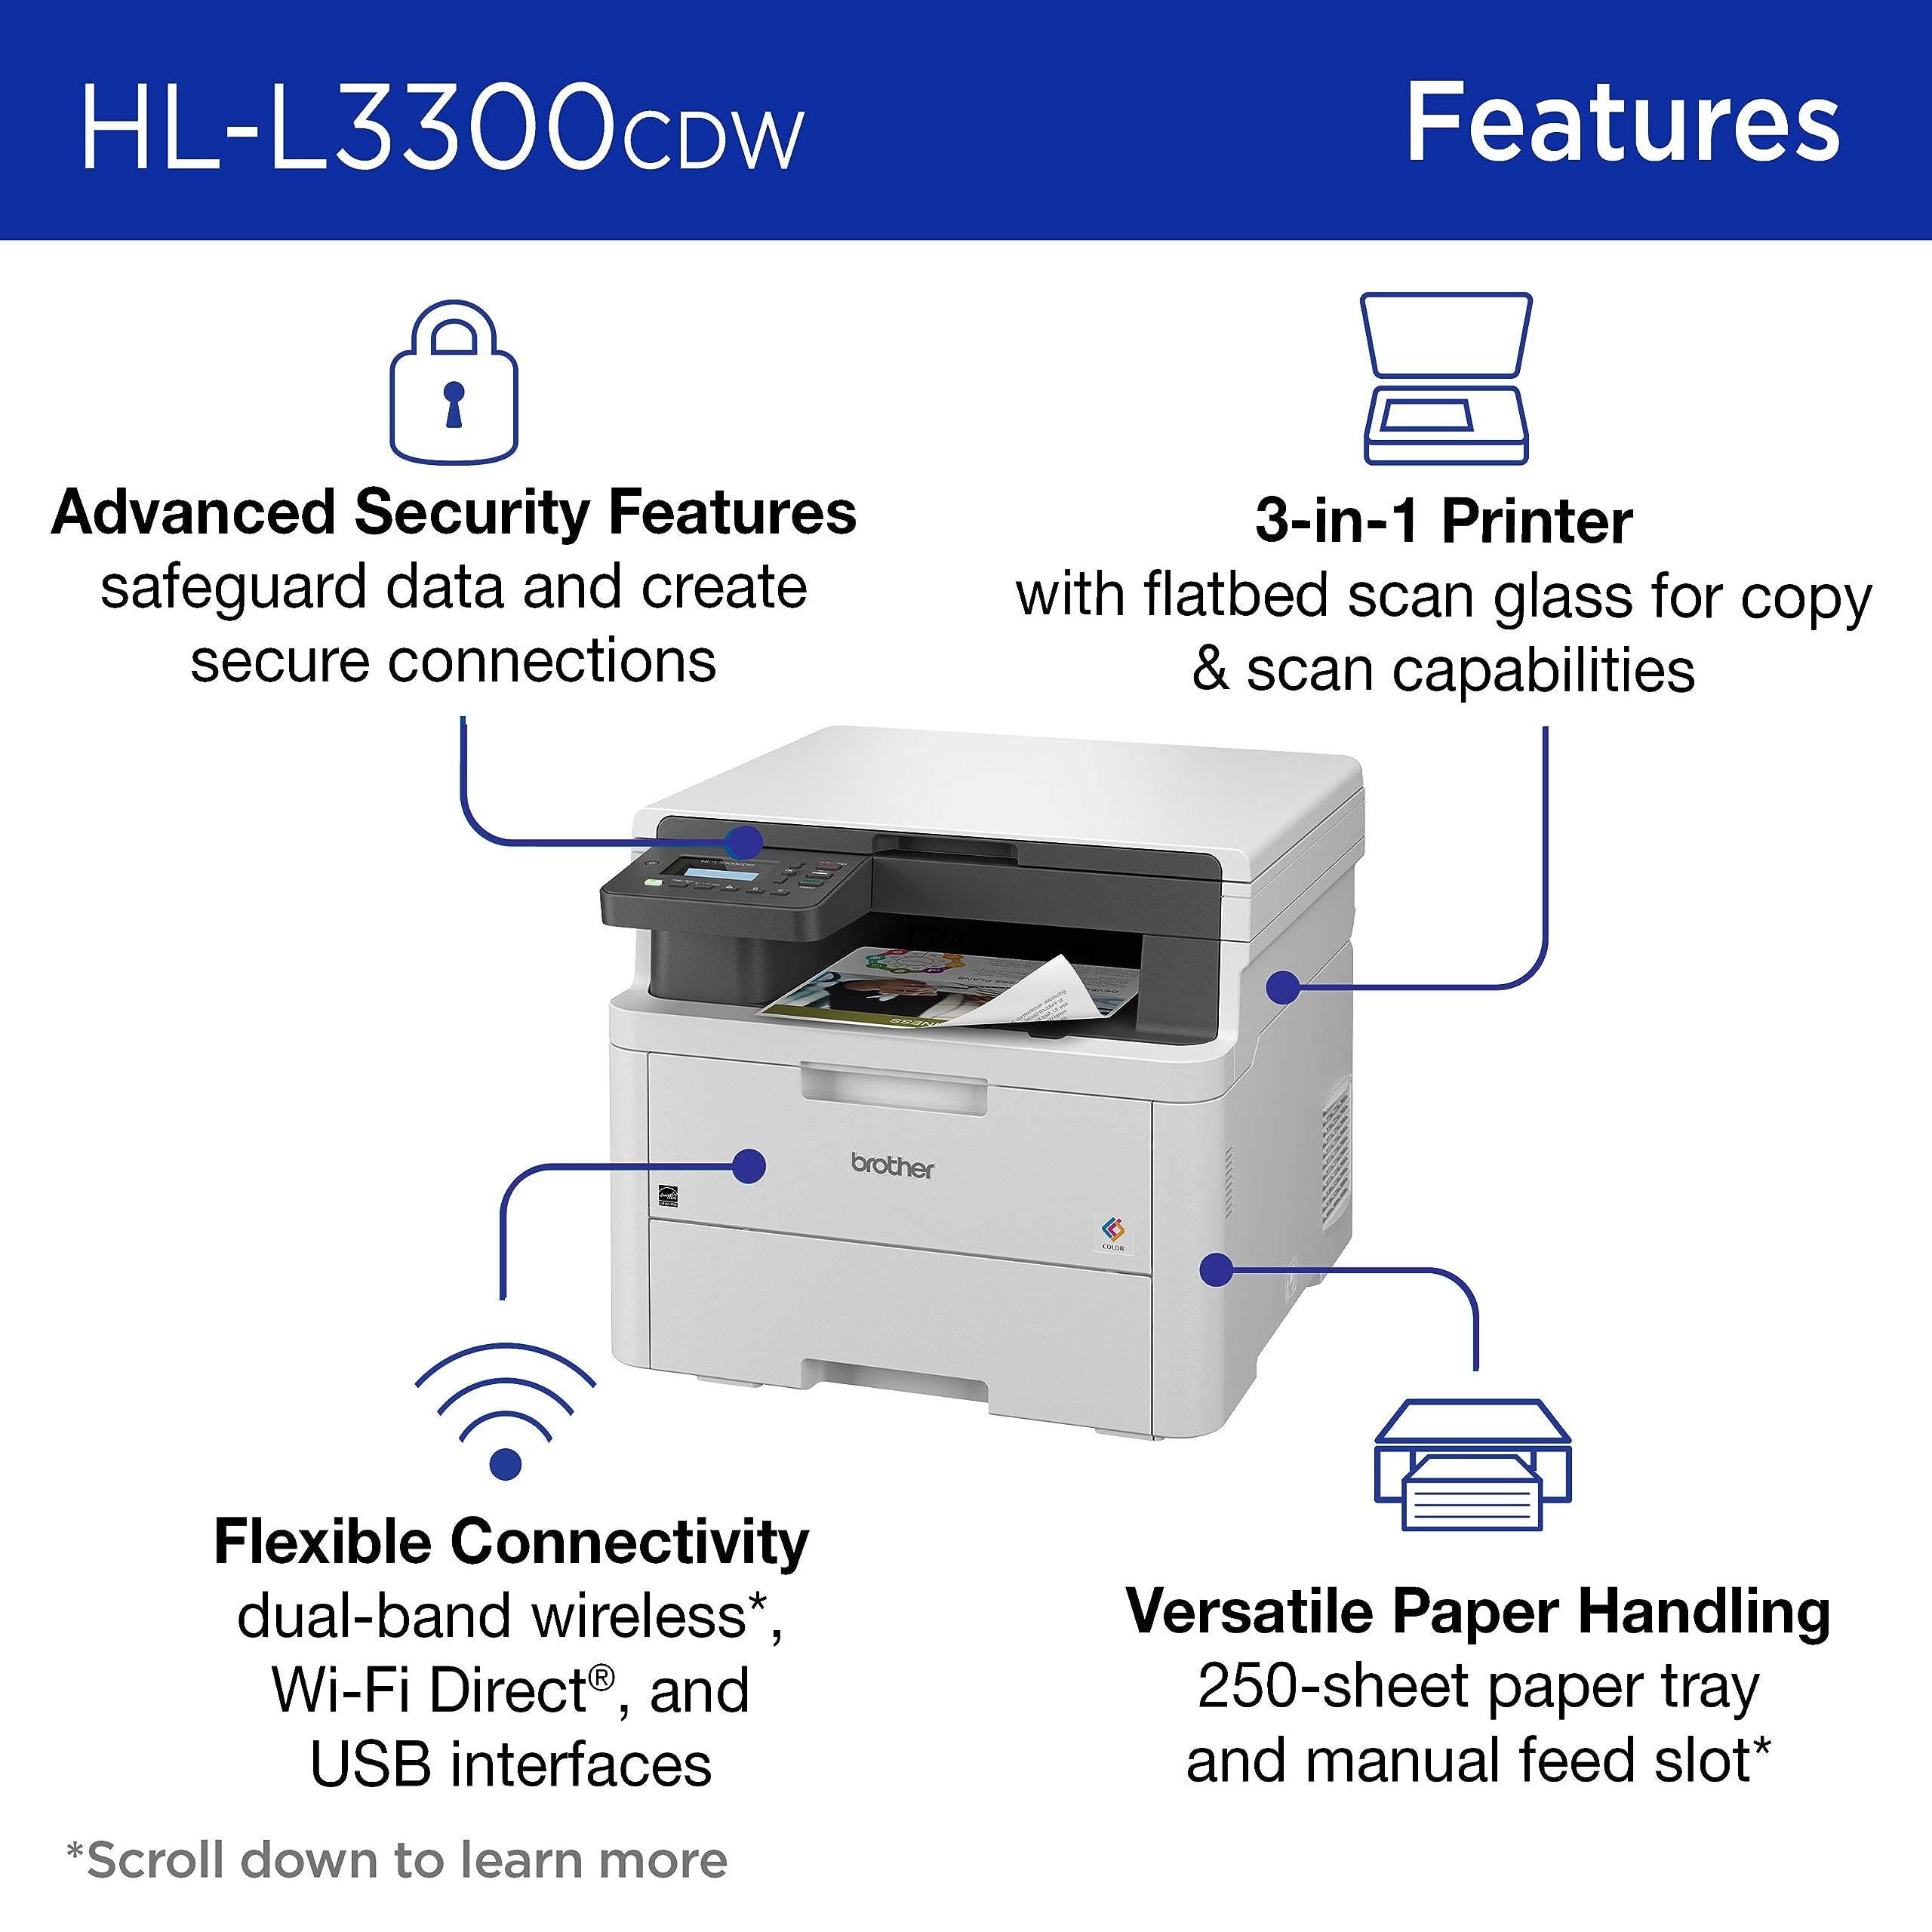 Brother HL-L3300CDW Wireless Digital Color Multi-Function Printer with Laser Quality Output, Copy & Scan, Duplex, Mobile | Includes 4 Month Refresh Subscription Trial ¹ Amazon Dash Replenishment Ready